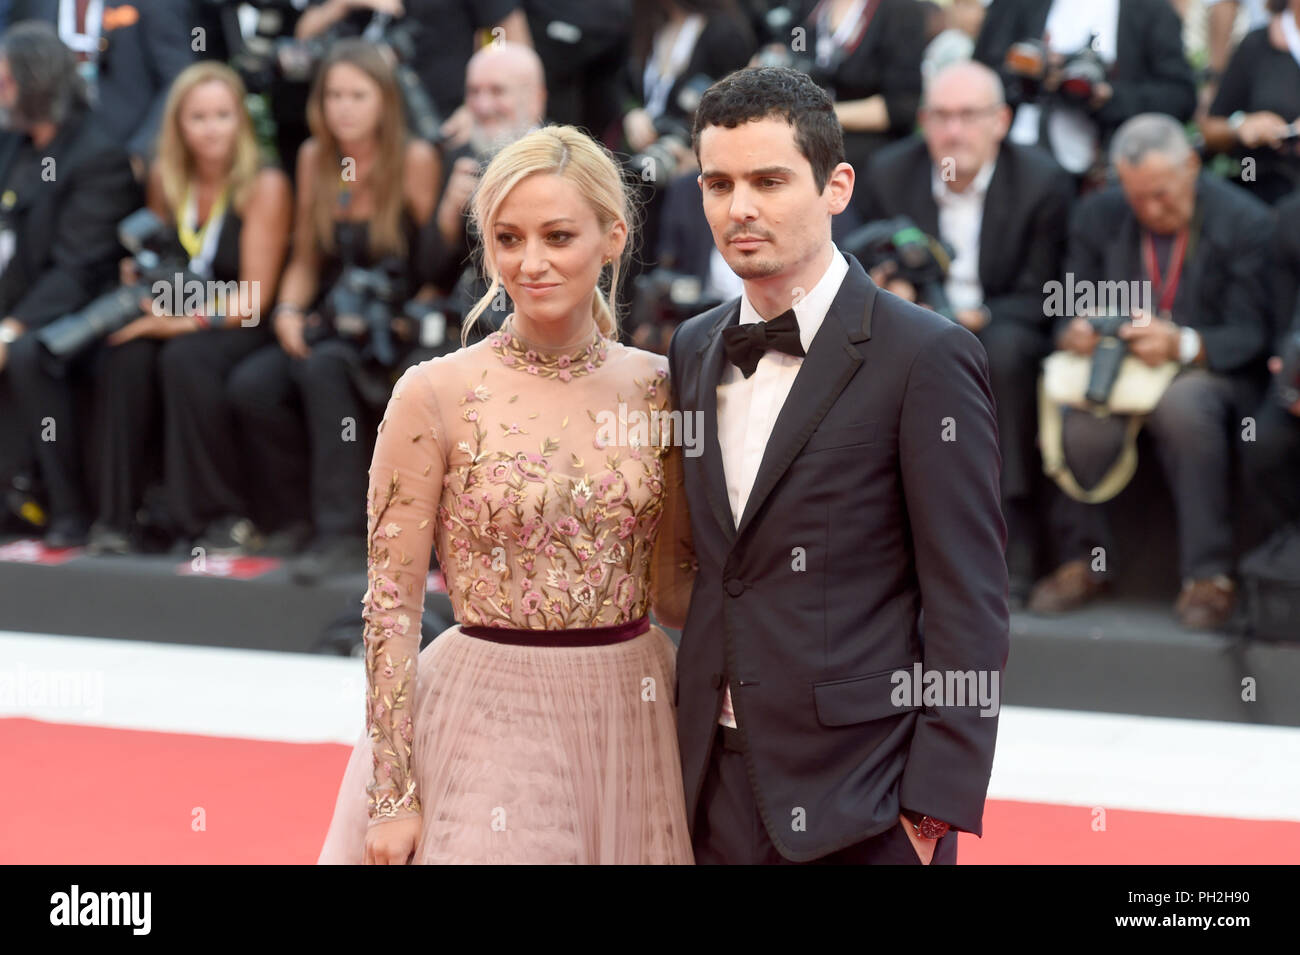 29.08.2018, Italy, Venice: The actress Olivia Hamilton and the screenwriter Damien Chazelle can be seen at the opening of the film festival on the red carpet at the Lido. The film festival runs from 29 August to 8 September and is taking place for the 75th time this year. Photo: Felix Hörhager/dpa Stock Photo